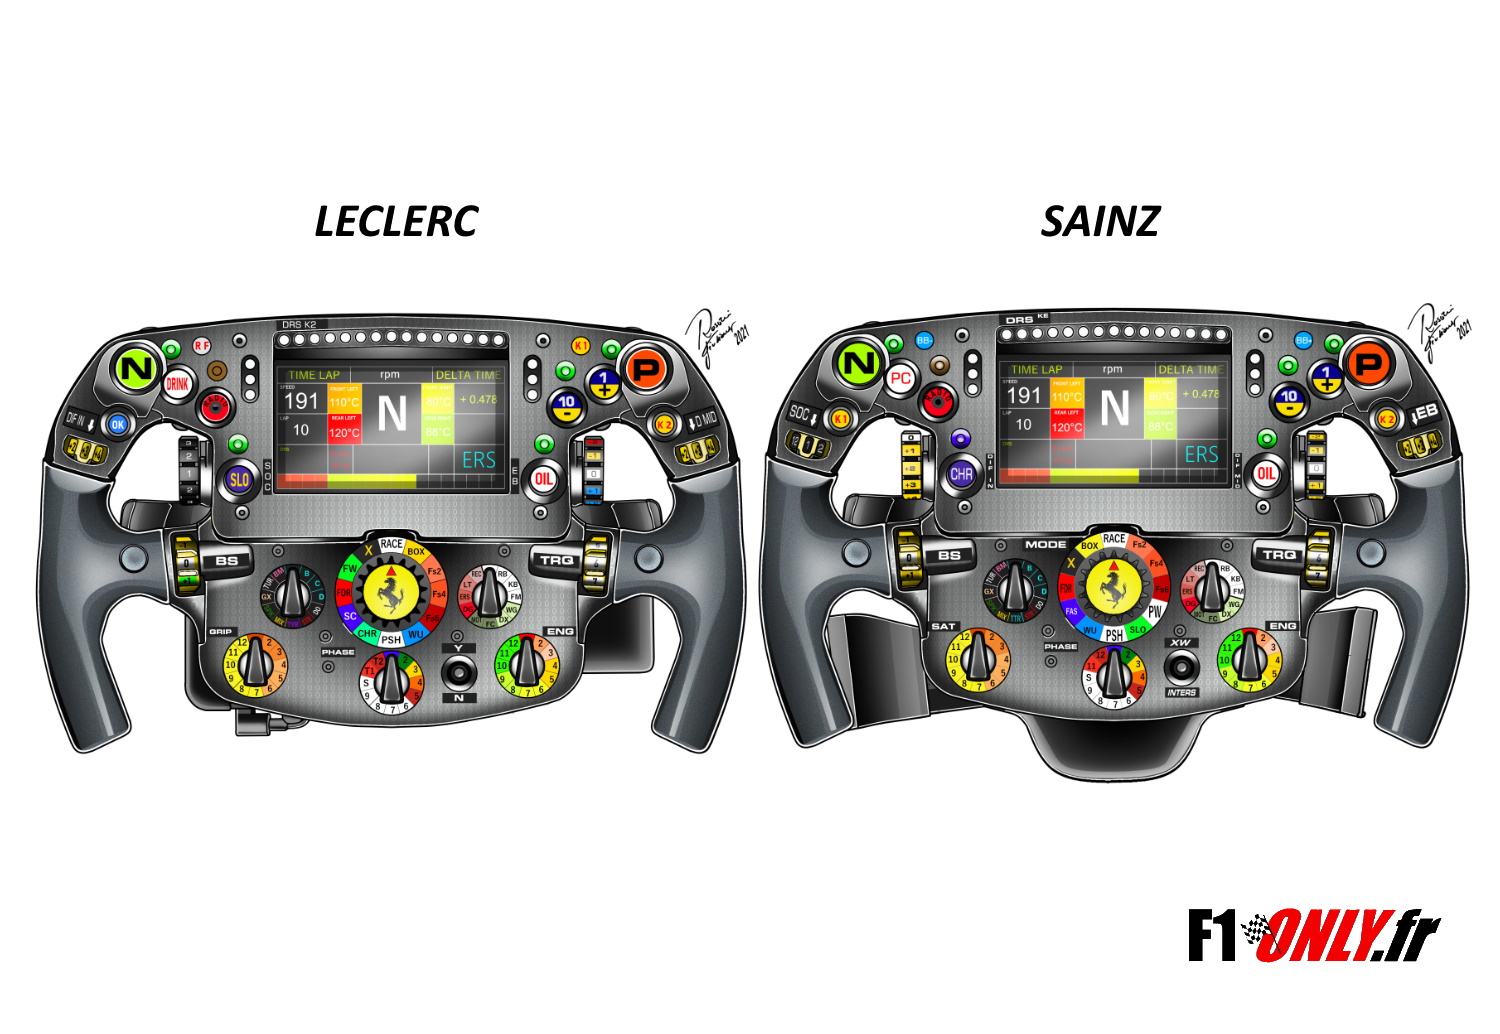 F1 - The differences between the Ferrari steering wheel of Sainz and that of Leclerc